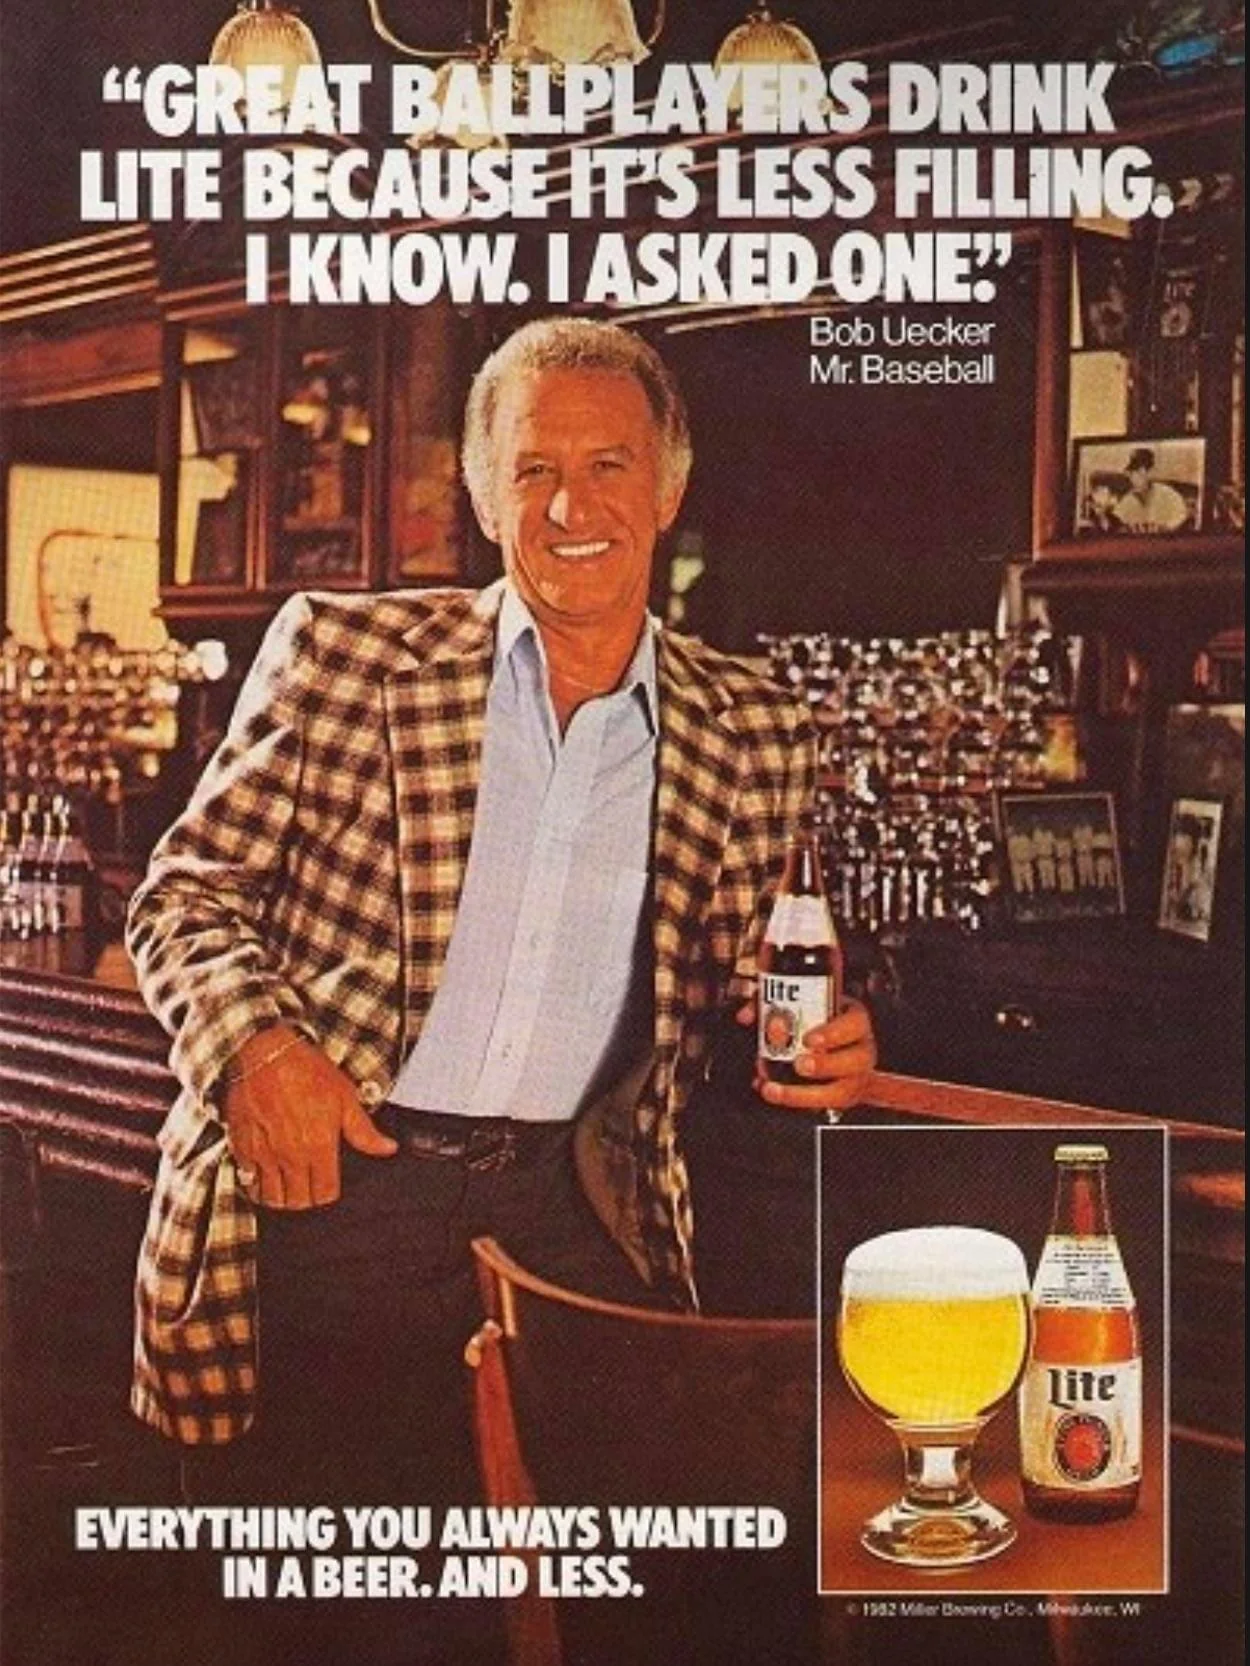 "GREAT BALIPLAYERS DRINK LITE BECAUSE IFS LESS FILLING. I KNOW. I ASKED ONE* Bob Uecker Mr. Baseball